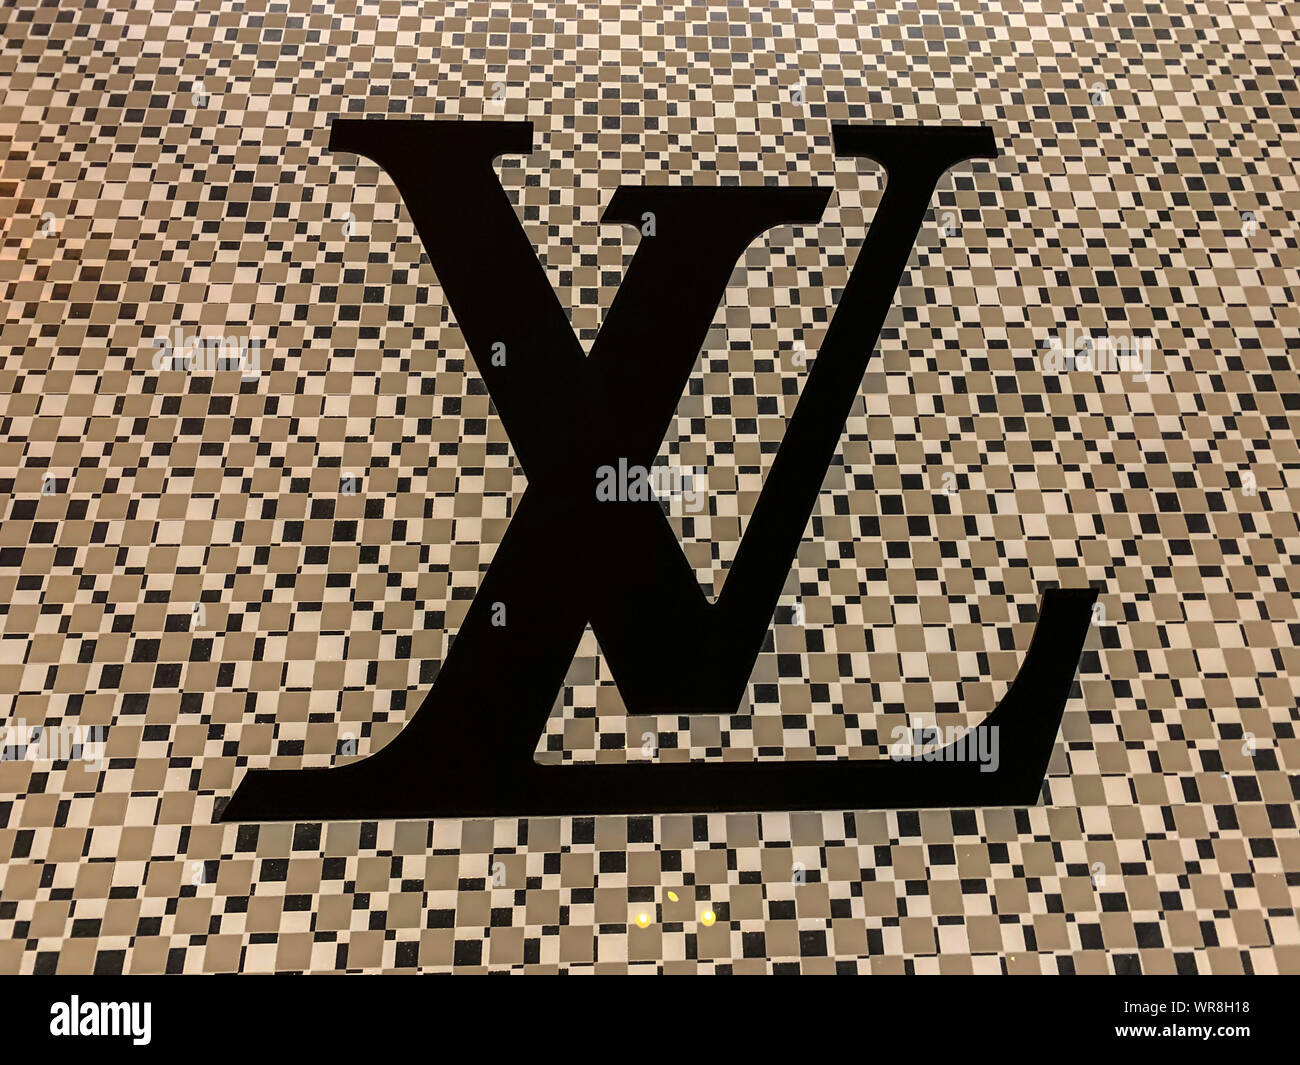 Louis vuitton brand hi-res stock photography and images - Alamy